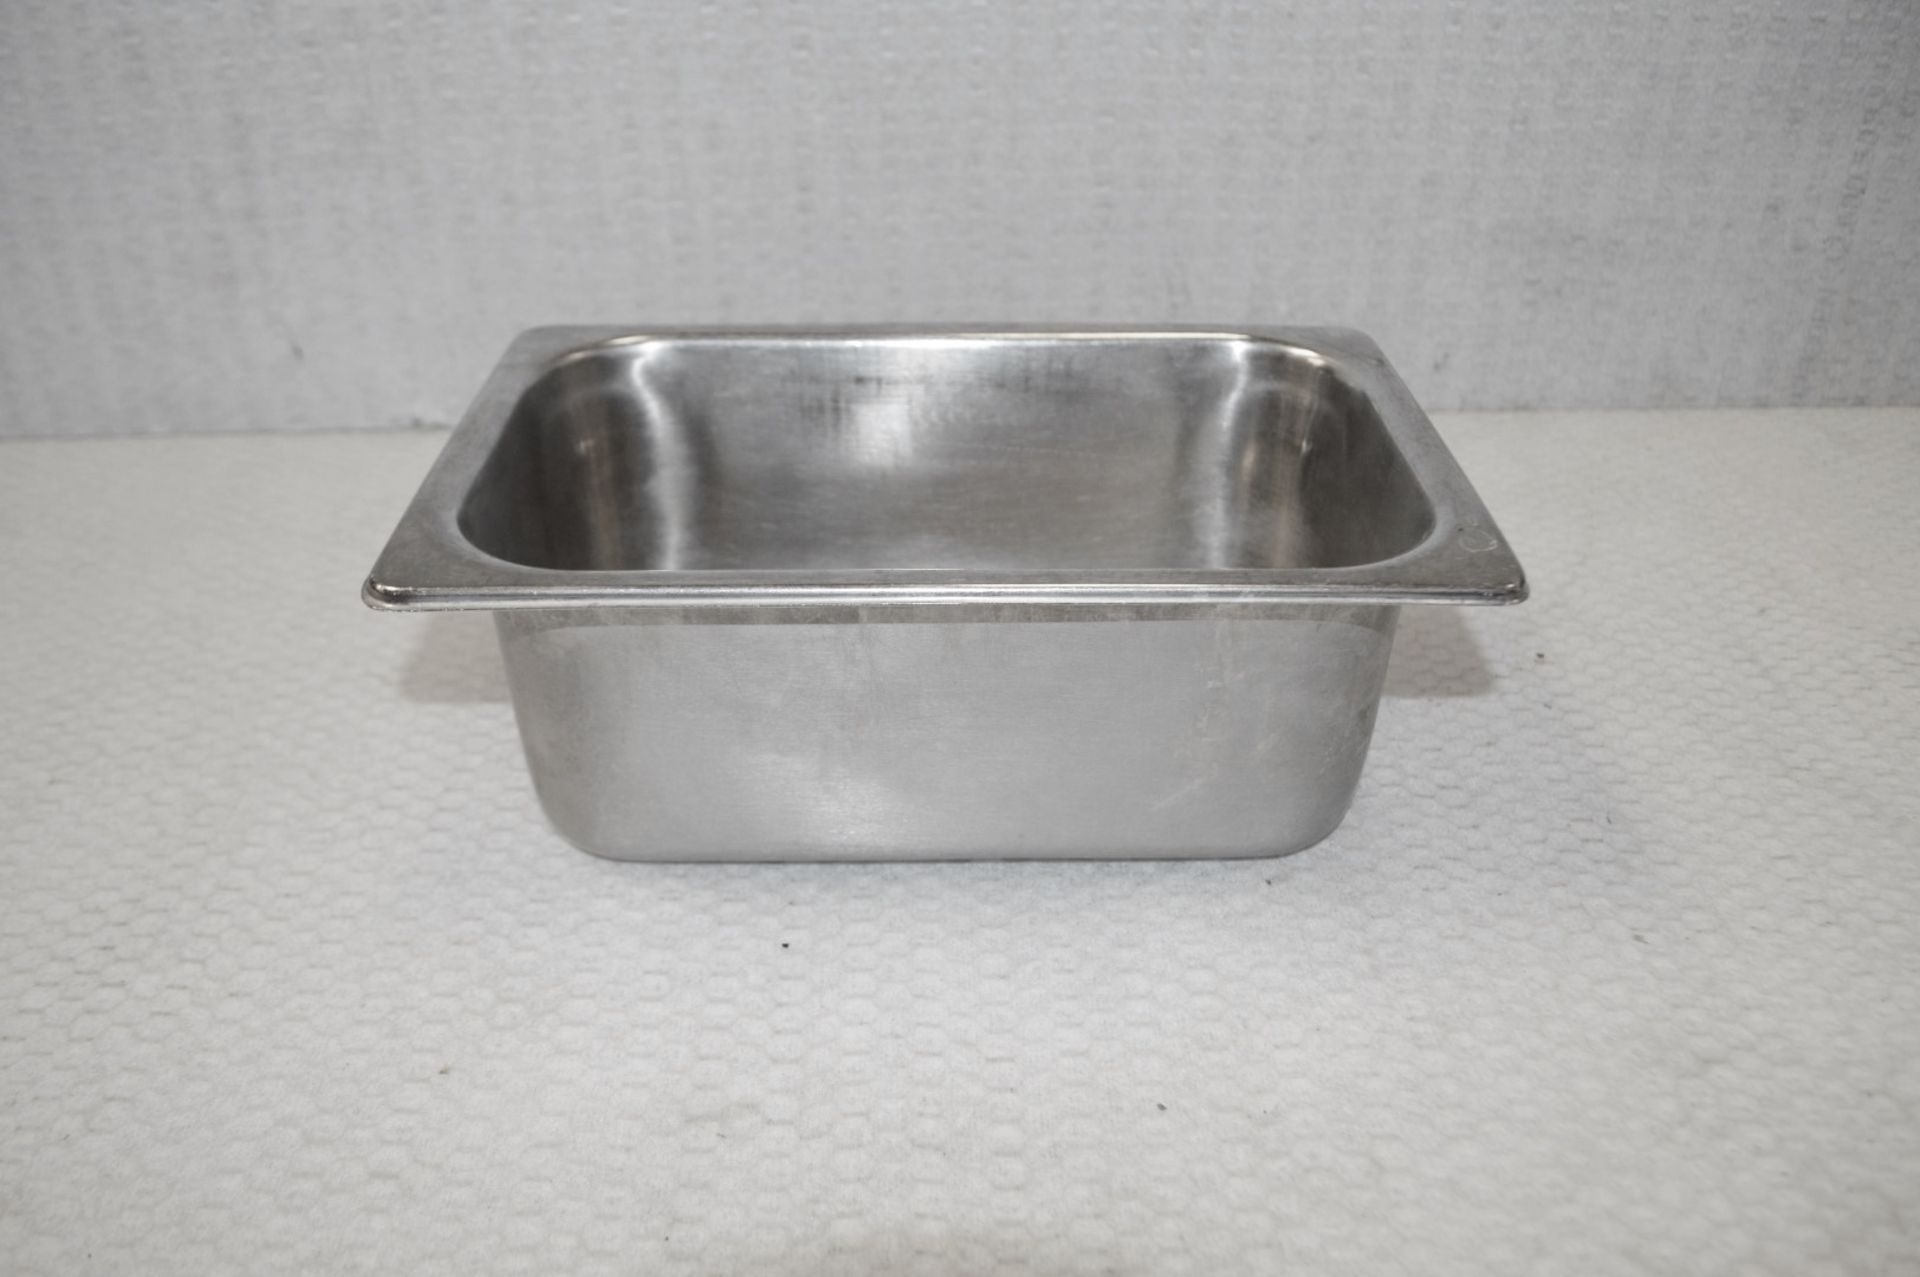 12 x Stainless Steel Gastronorm Pans - Dimensions: L26 x W16 x D10cm - Recently Removed From a